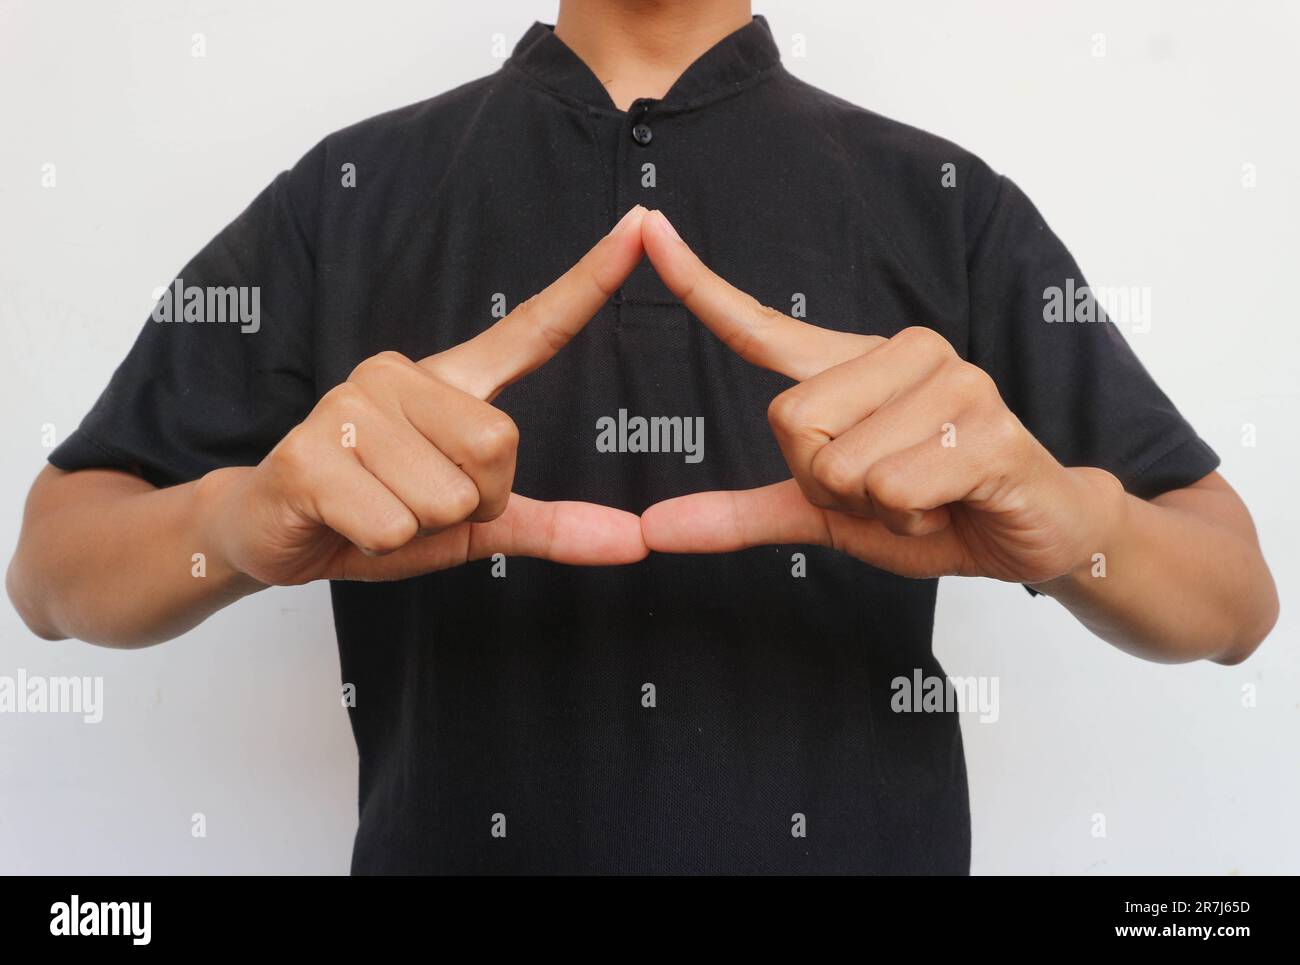 The man with the black shirt raised his hand to show triangle shape. Stock Photo